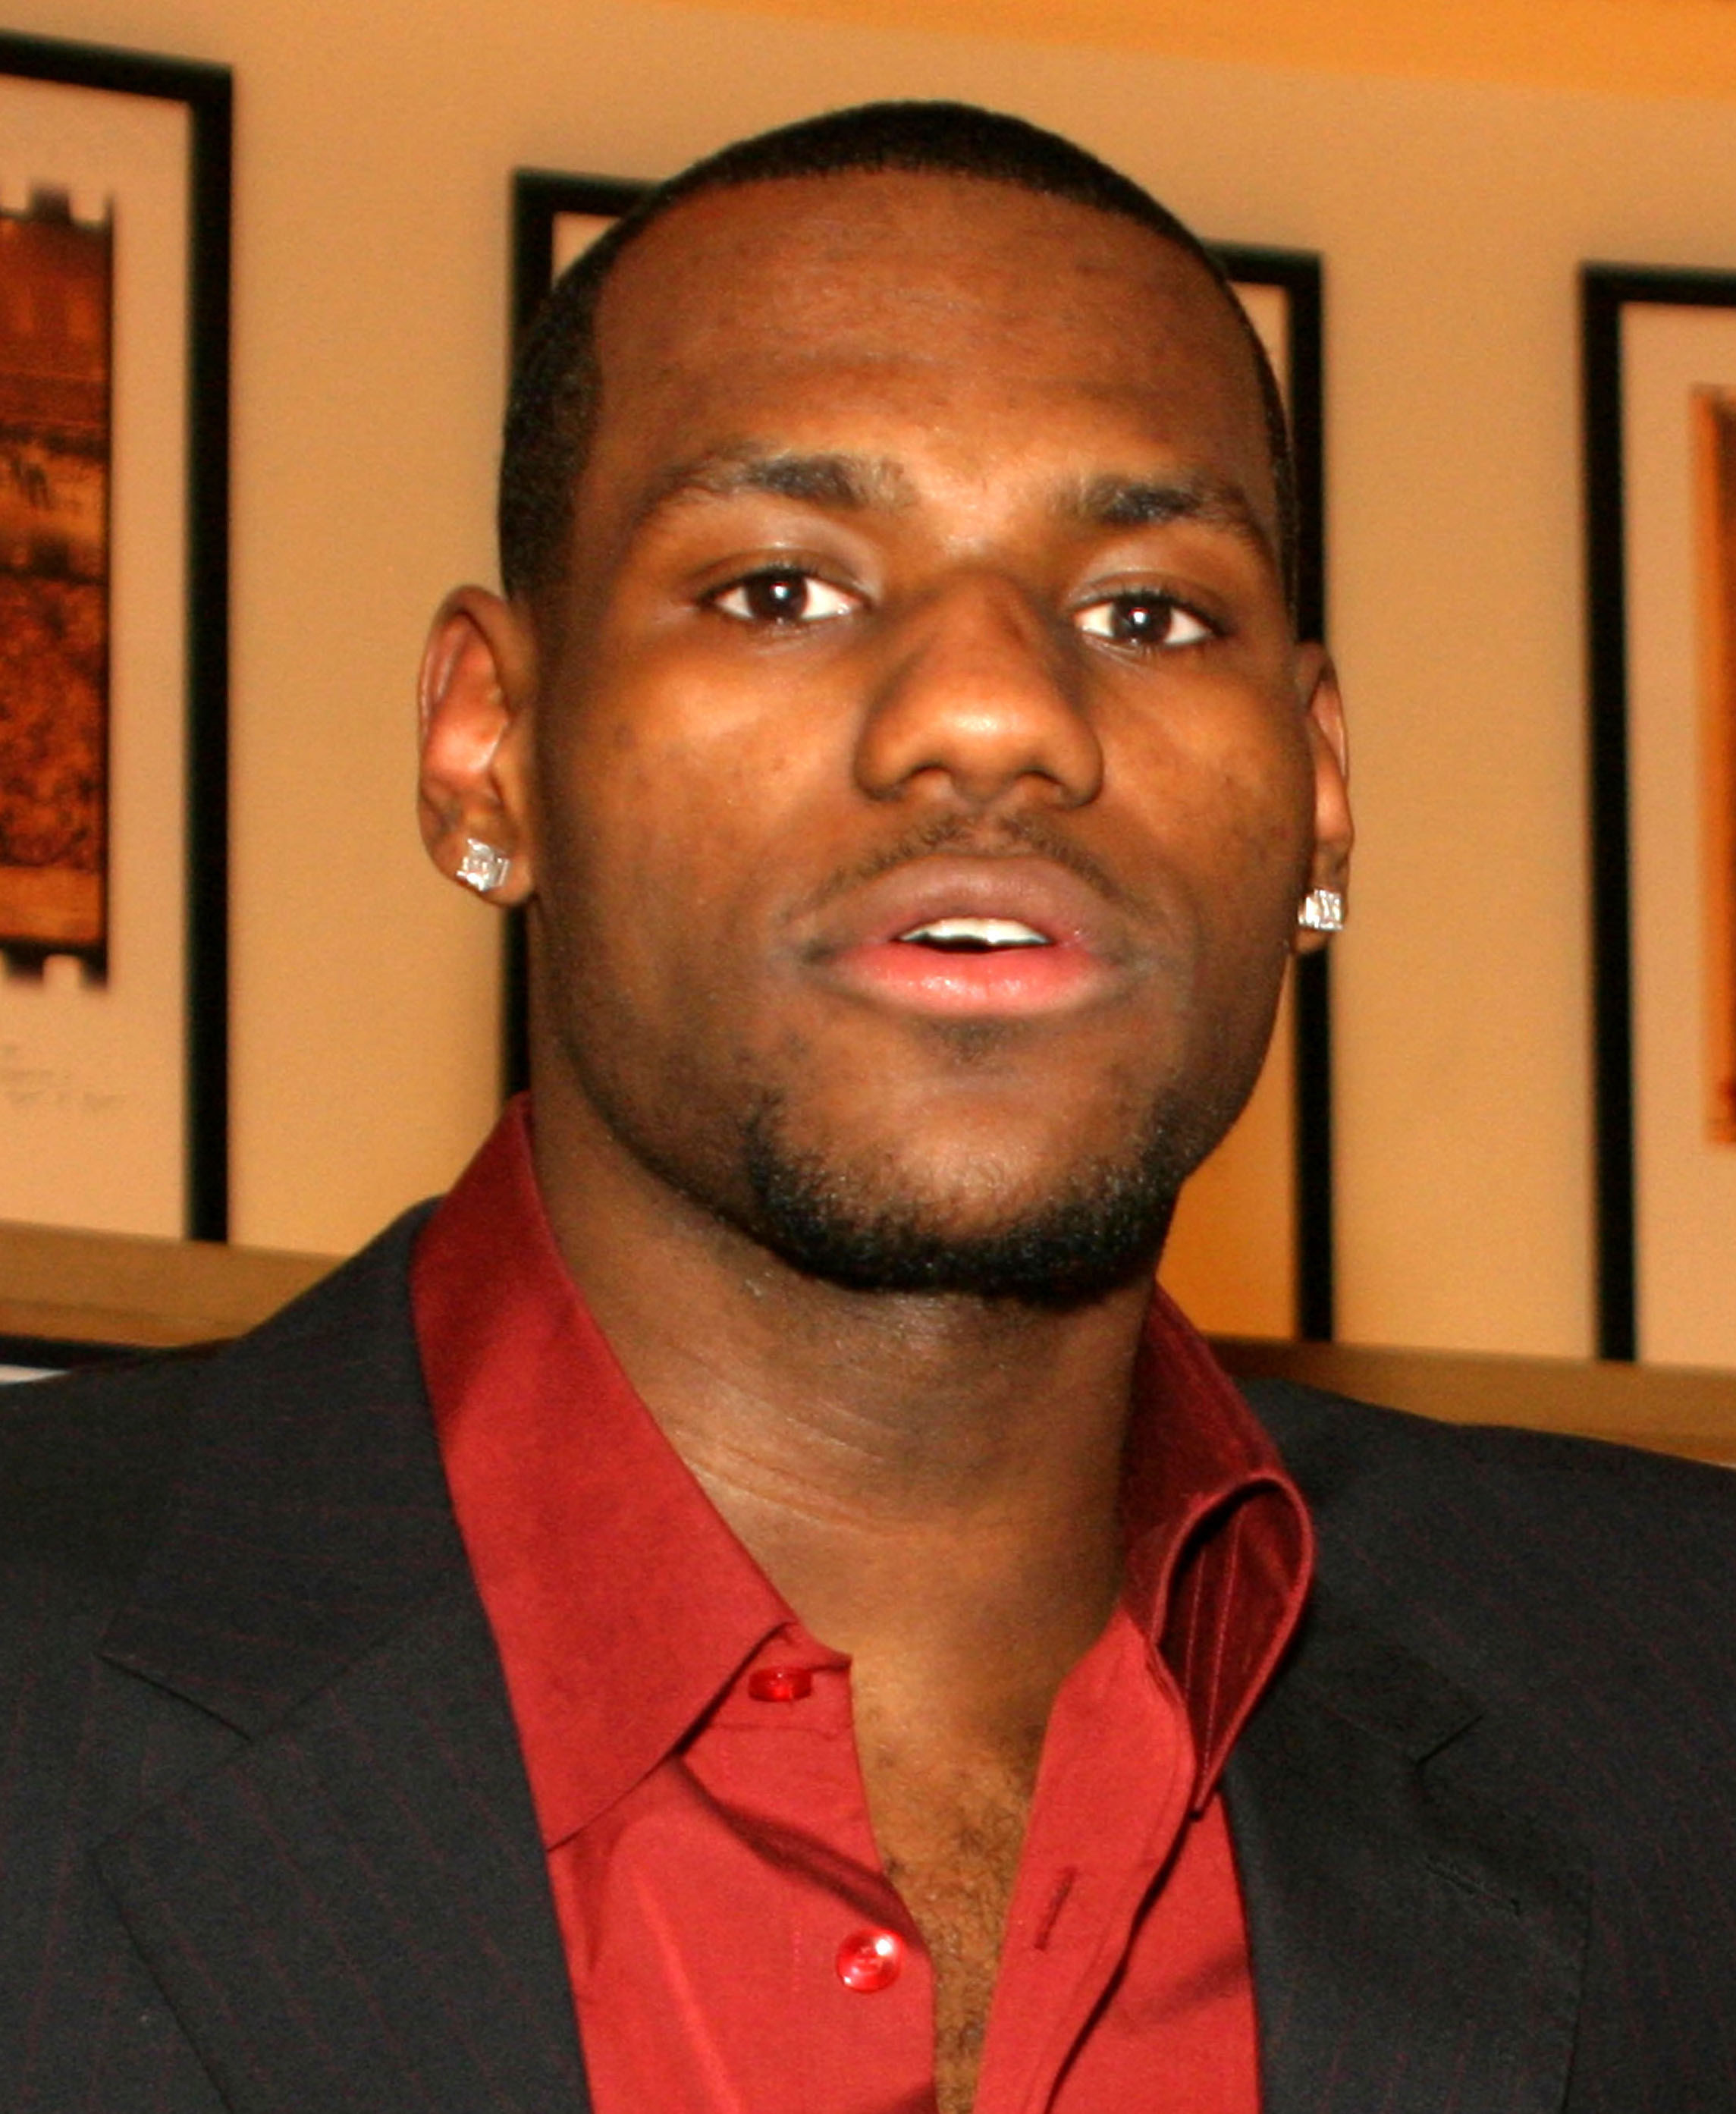 Young Lebron James in dress clothes.